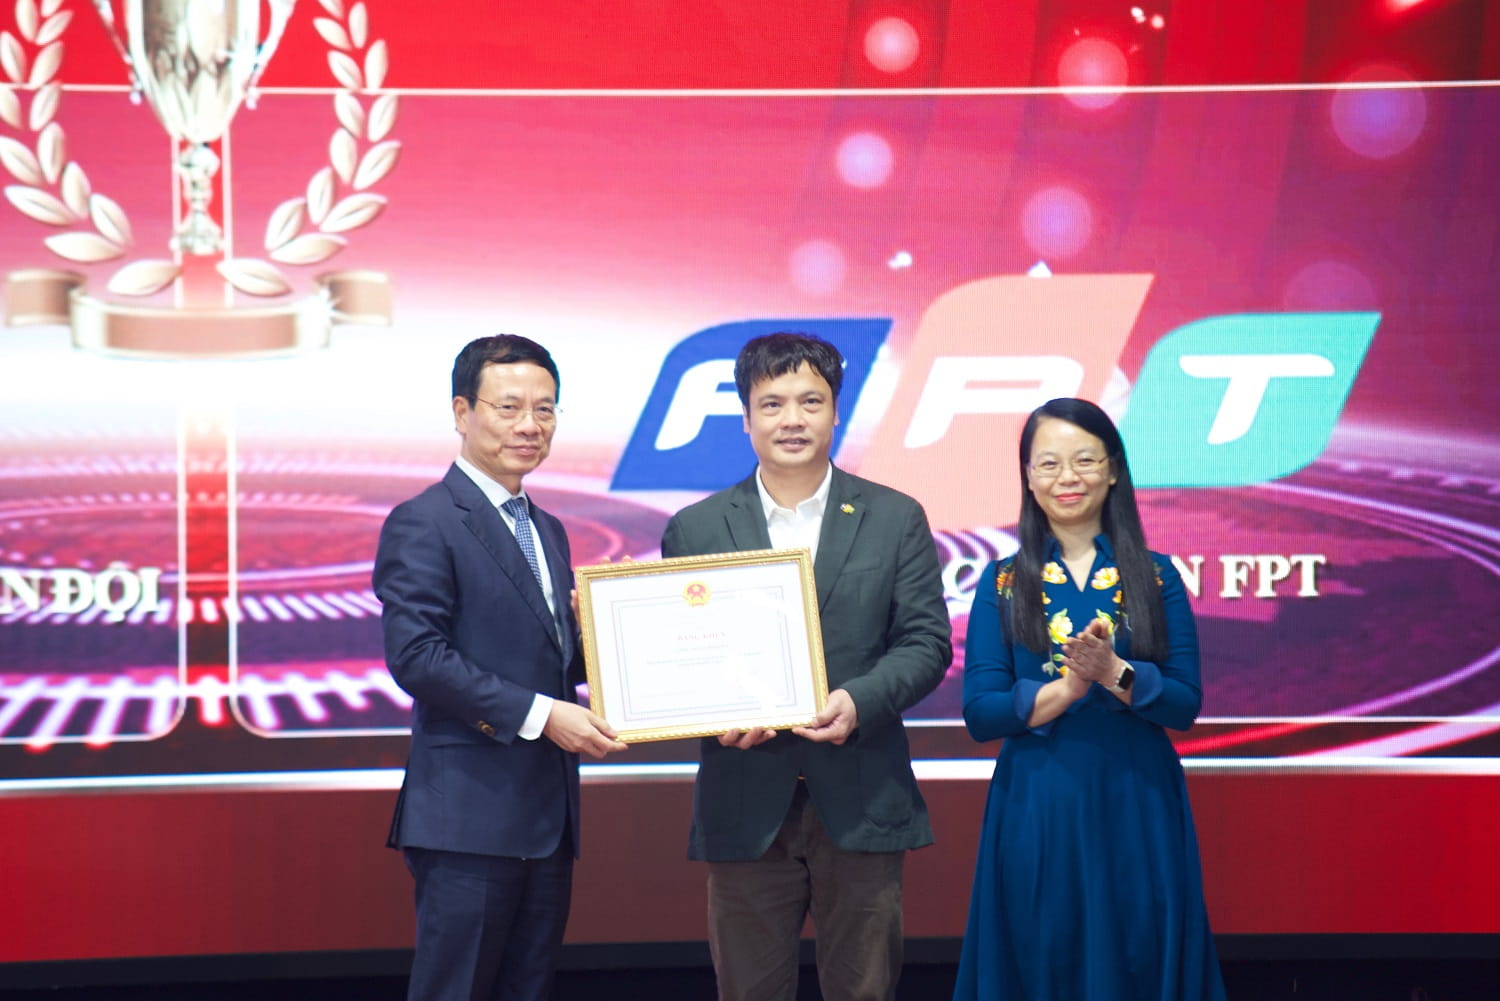 Mr. Nguyen Van Khoa, CEO of FPT, and Ms. Chu Thi Thanh Ha, Chairperson of FPT Software (the subsidiary providing IT services to foreign markets), received the Certificate of Merit on behalf of the Corporation.